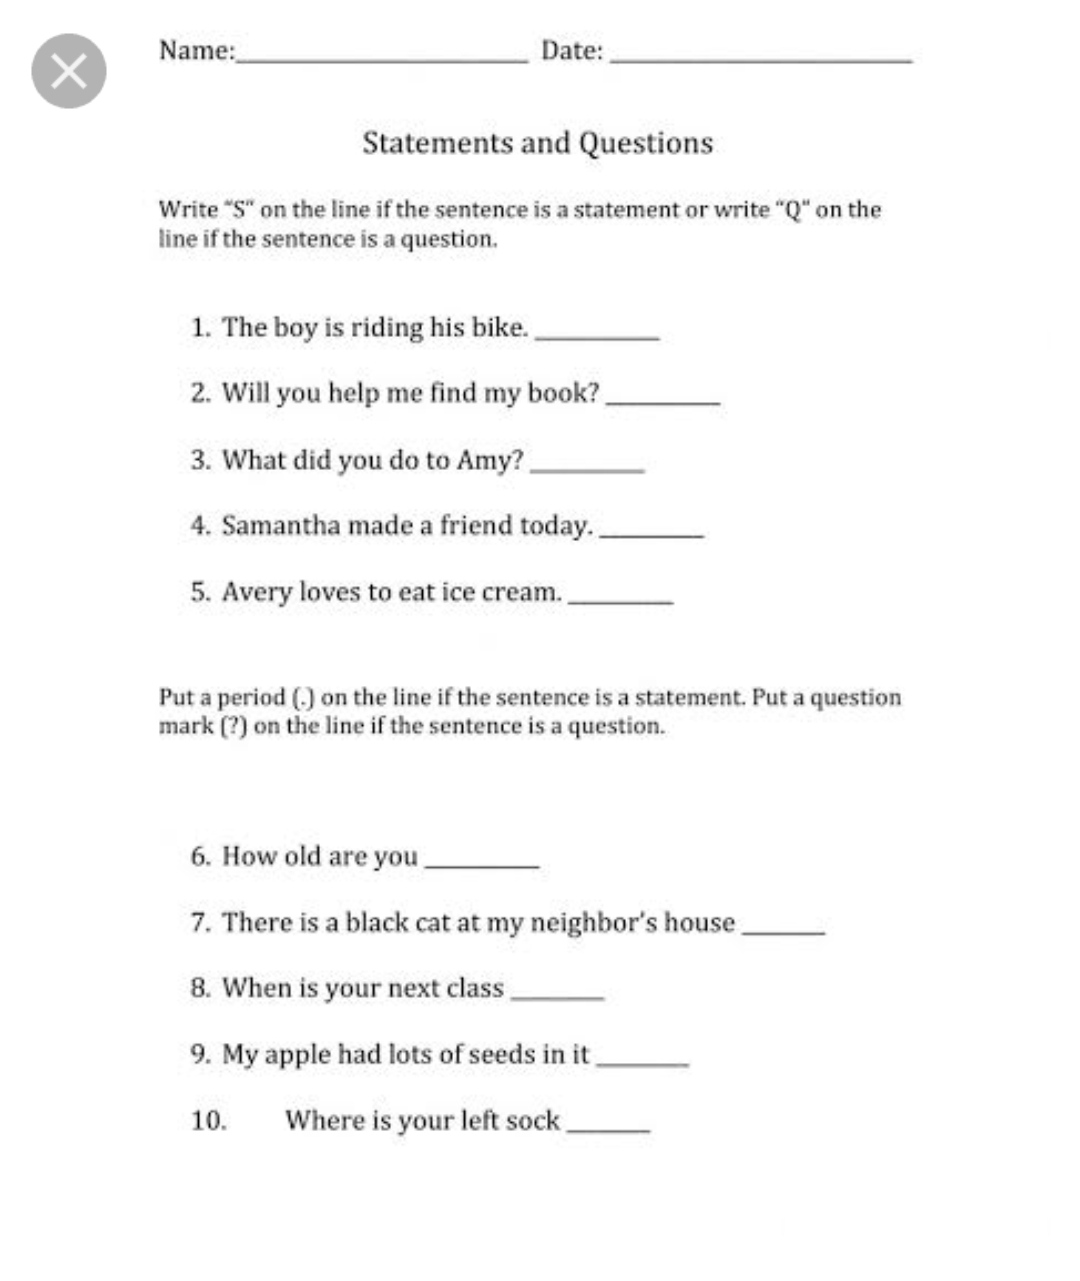 worksheet-of-chapter-8-english-notes-teachmint